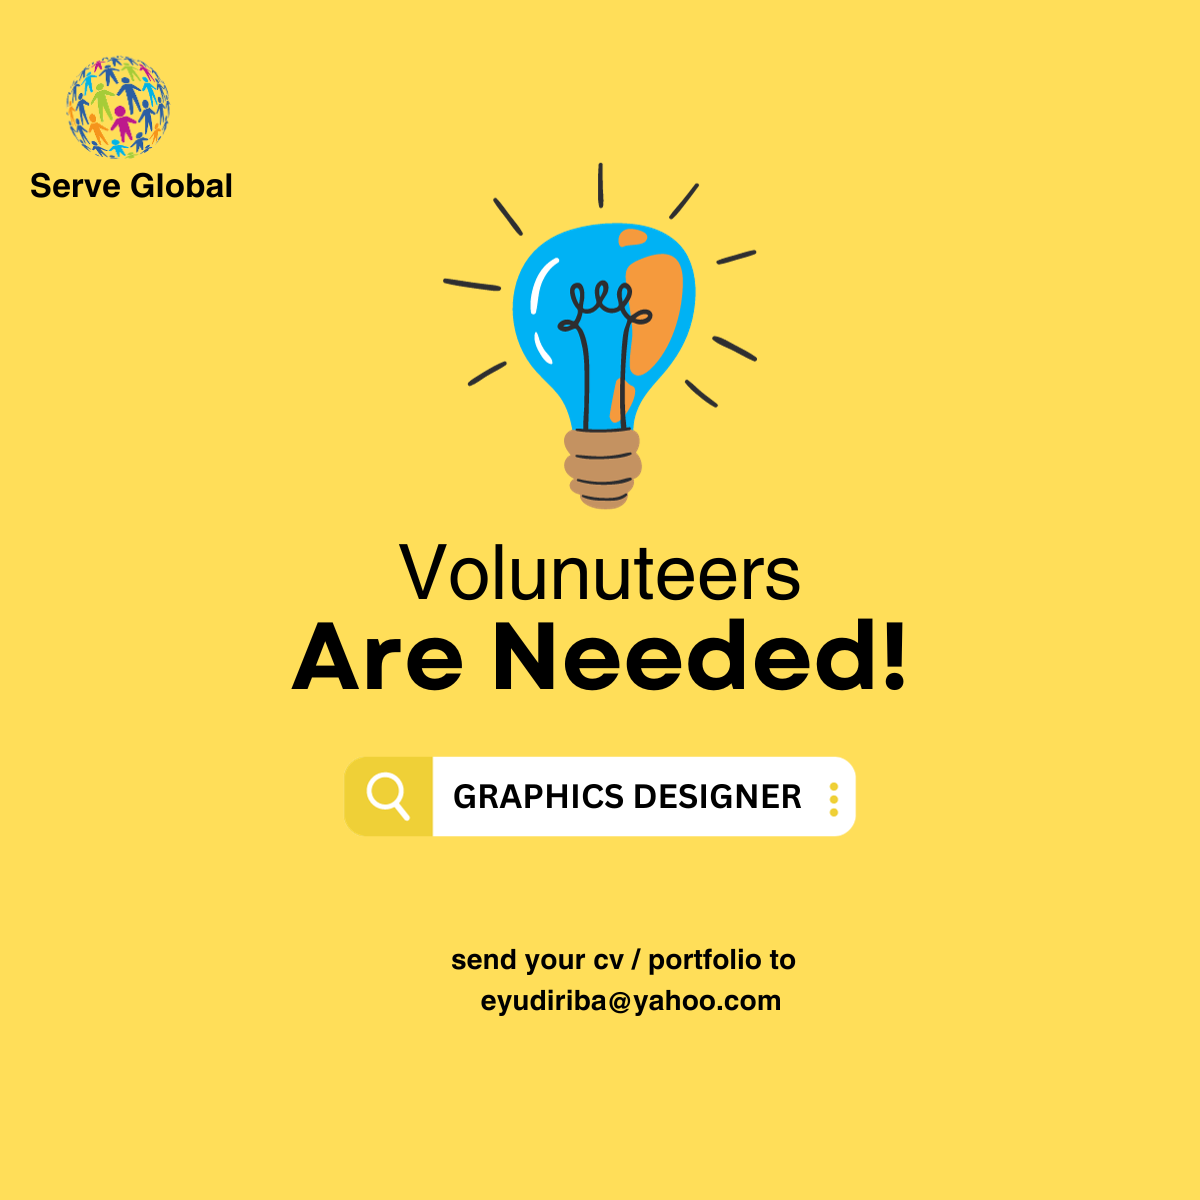 SOS Children's Villages is looking for six graphic designers to work remotely.  Responsibilities:  •  Design graphics for a variety of projects, including marketing materials, social media posts, and website content. •  Work closely with other team 